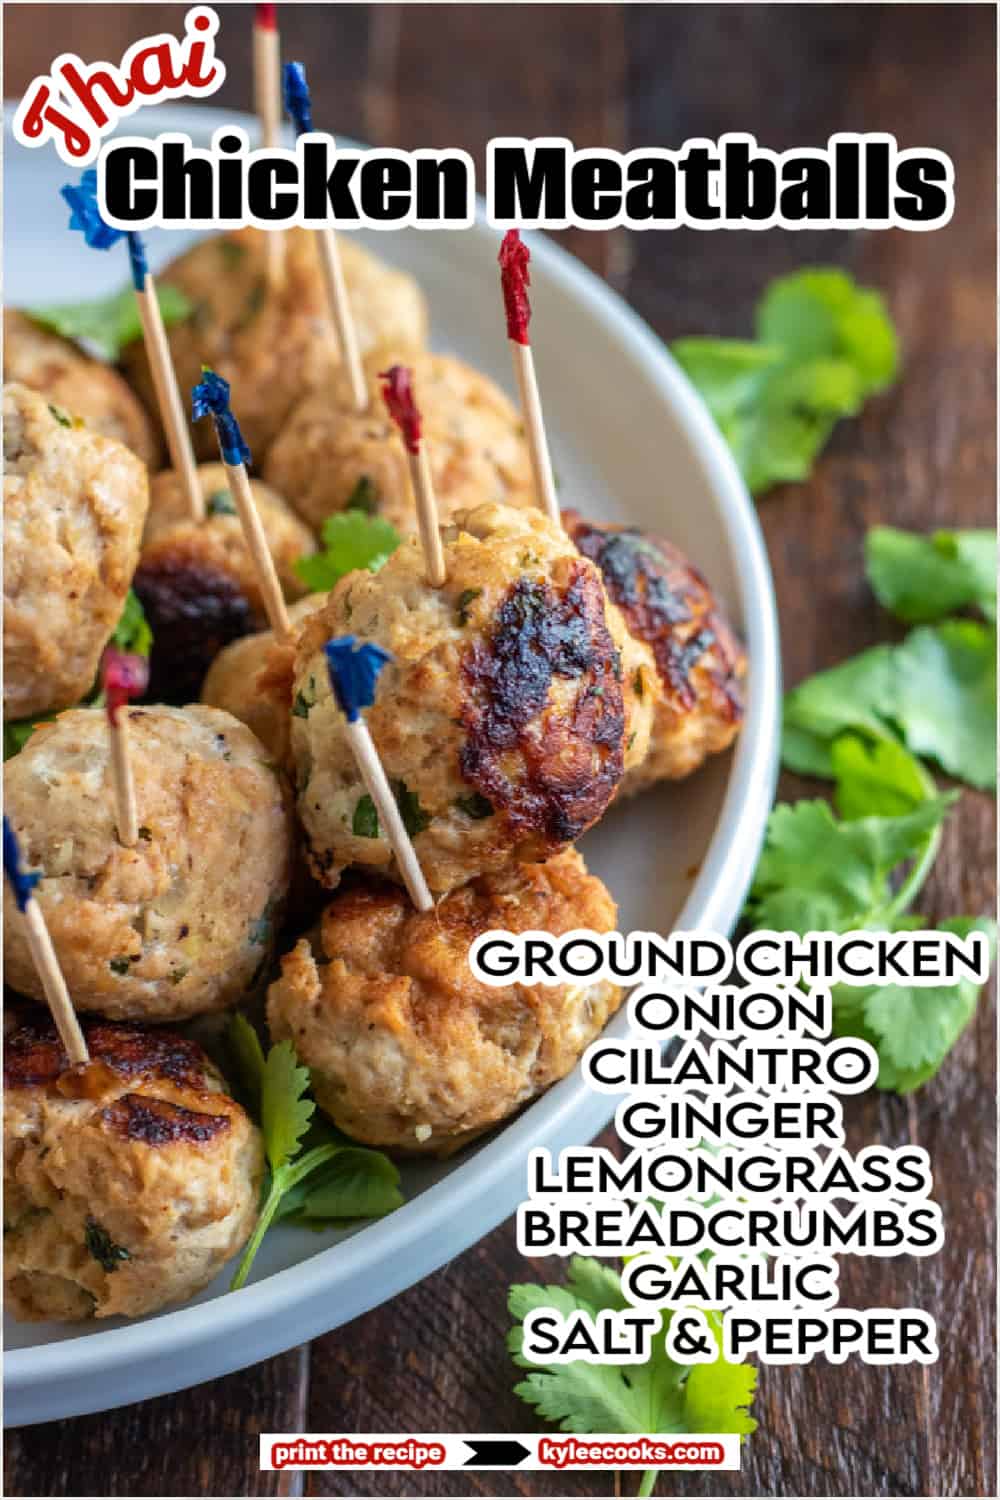 thai chicken meatballs with recipe name and ingredients overlaid in text.